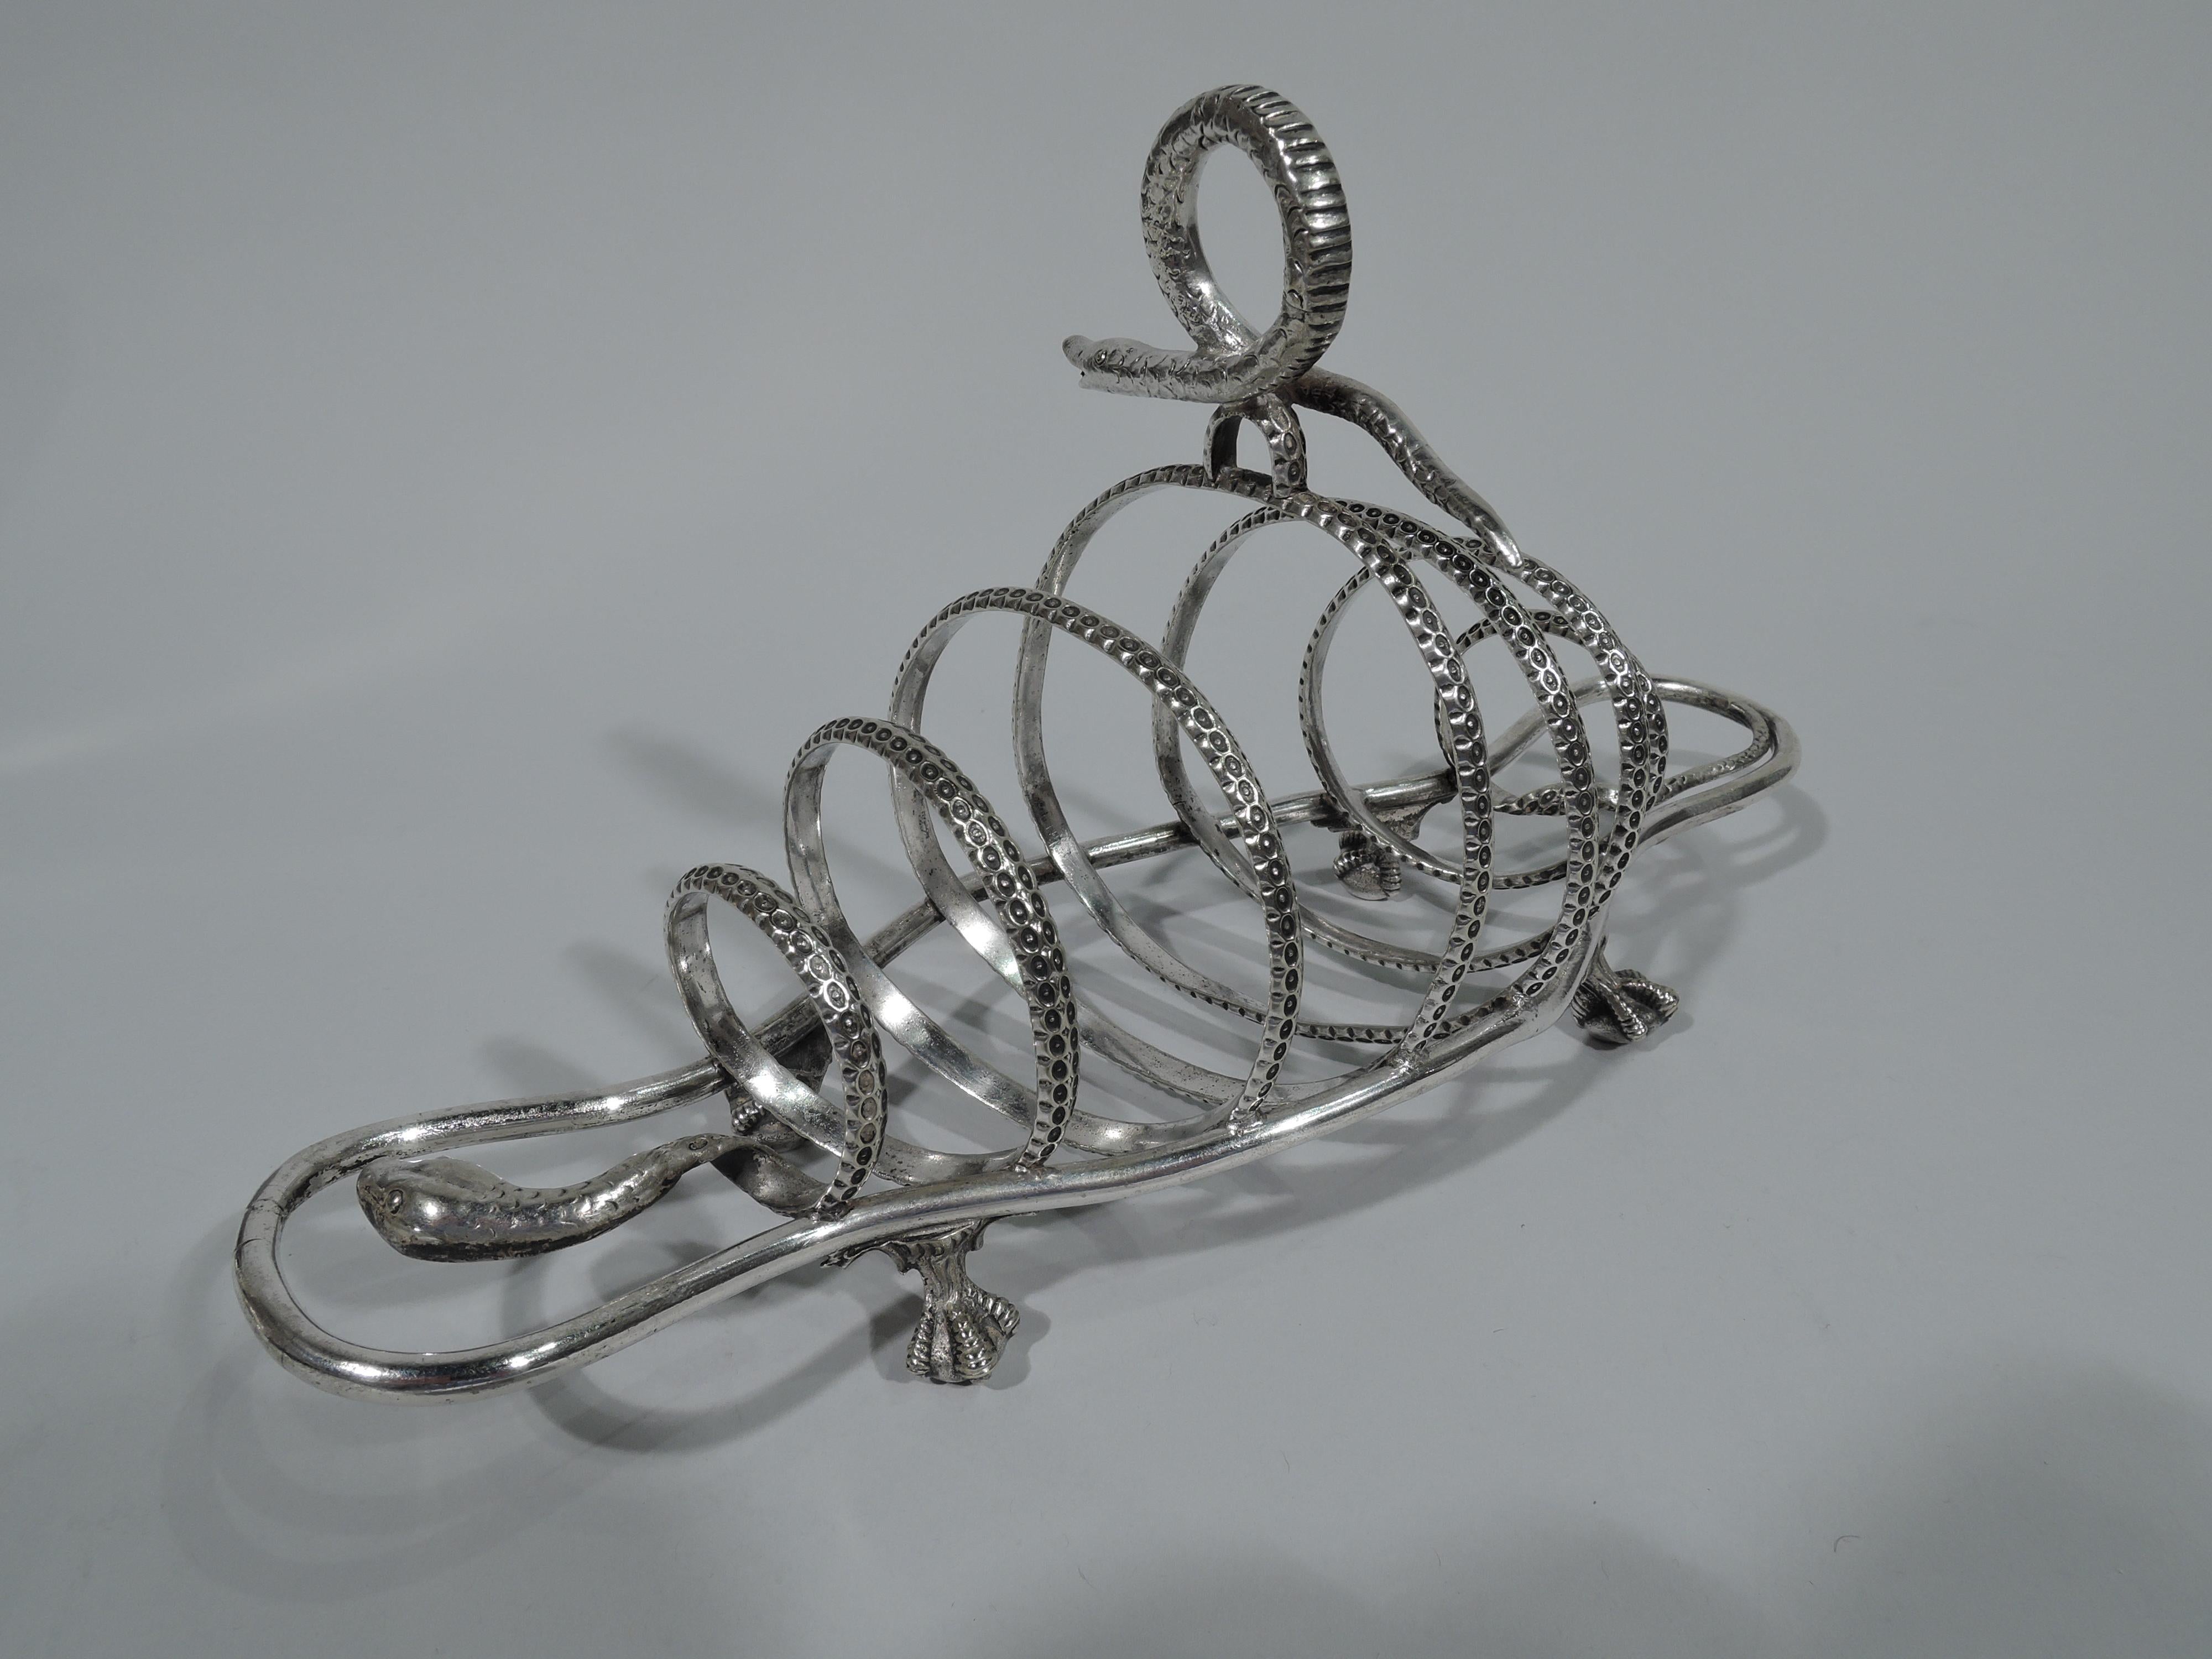 Exciting and unusual silver plate toast rack, circa 1890. Seven partitions in form of scaly, spiralling snake. Ring finial in form of second smaller snake. Open shaped frame with four claw-and-ball feet. Marked “DB”.